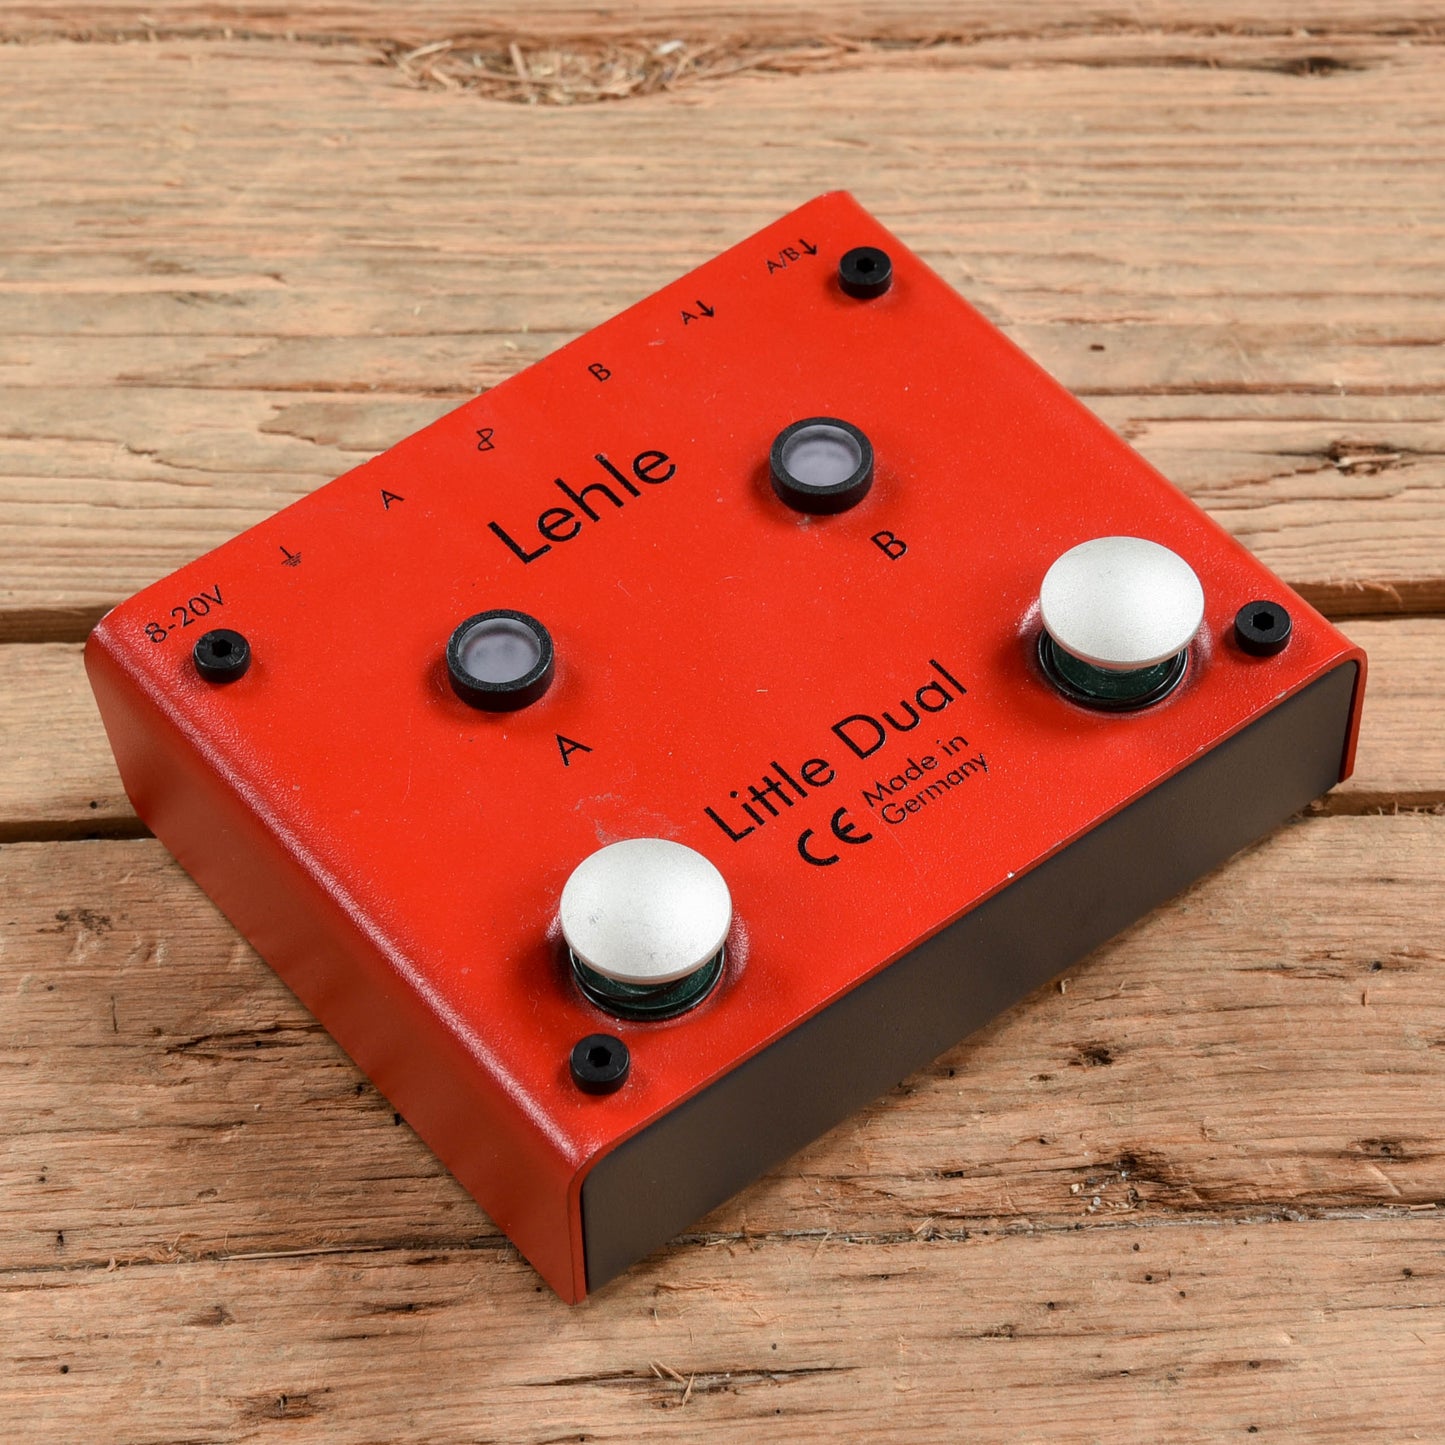 Lehle Little Dual Effects and Pedals / Controllers, Volume and Expression